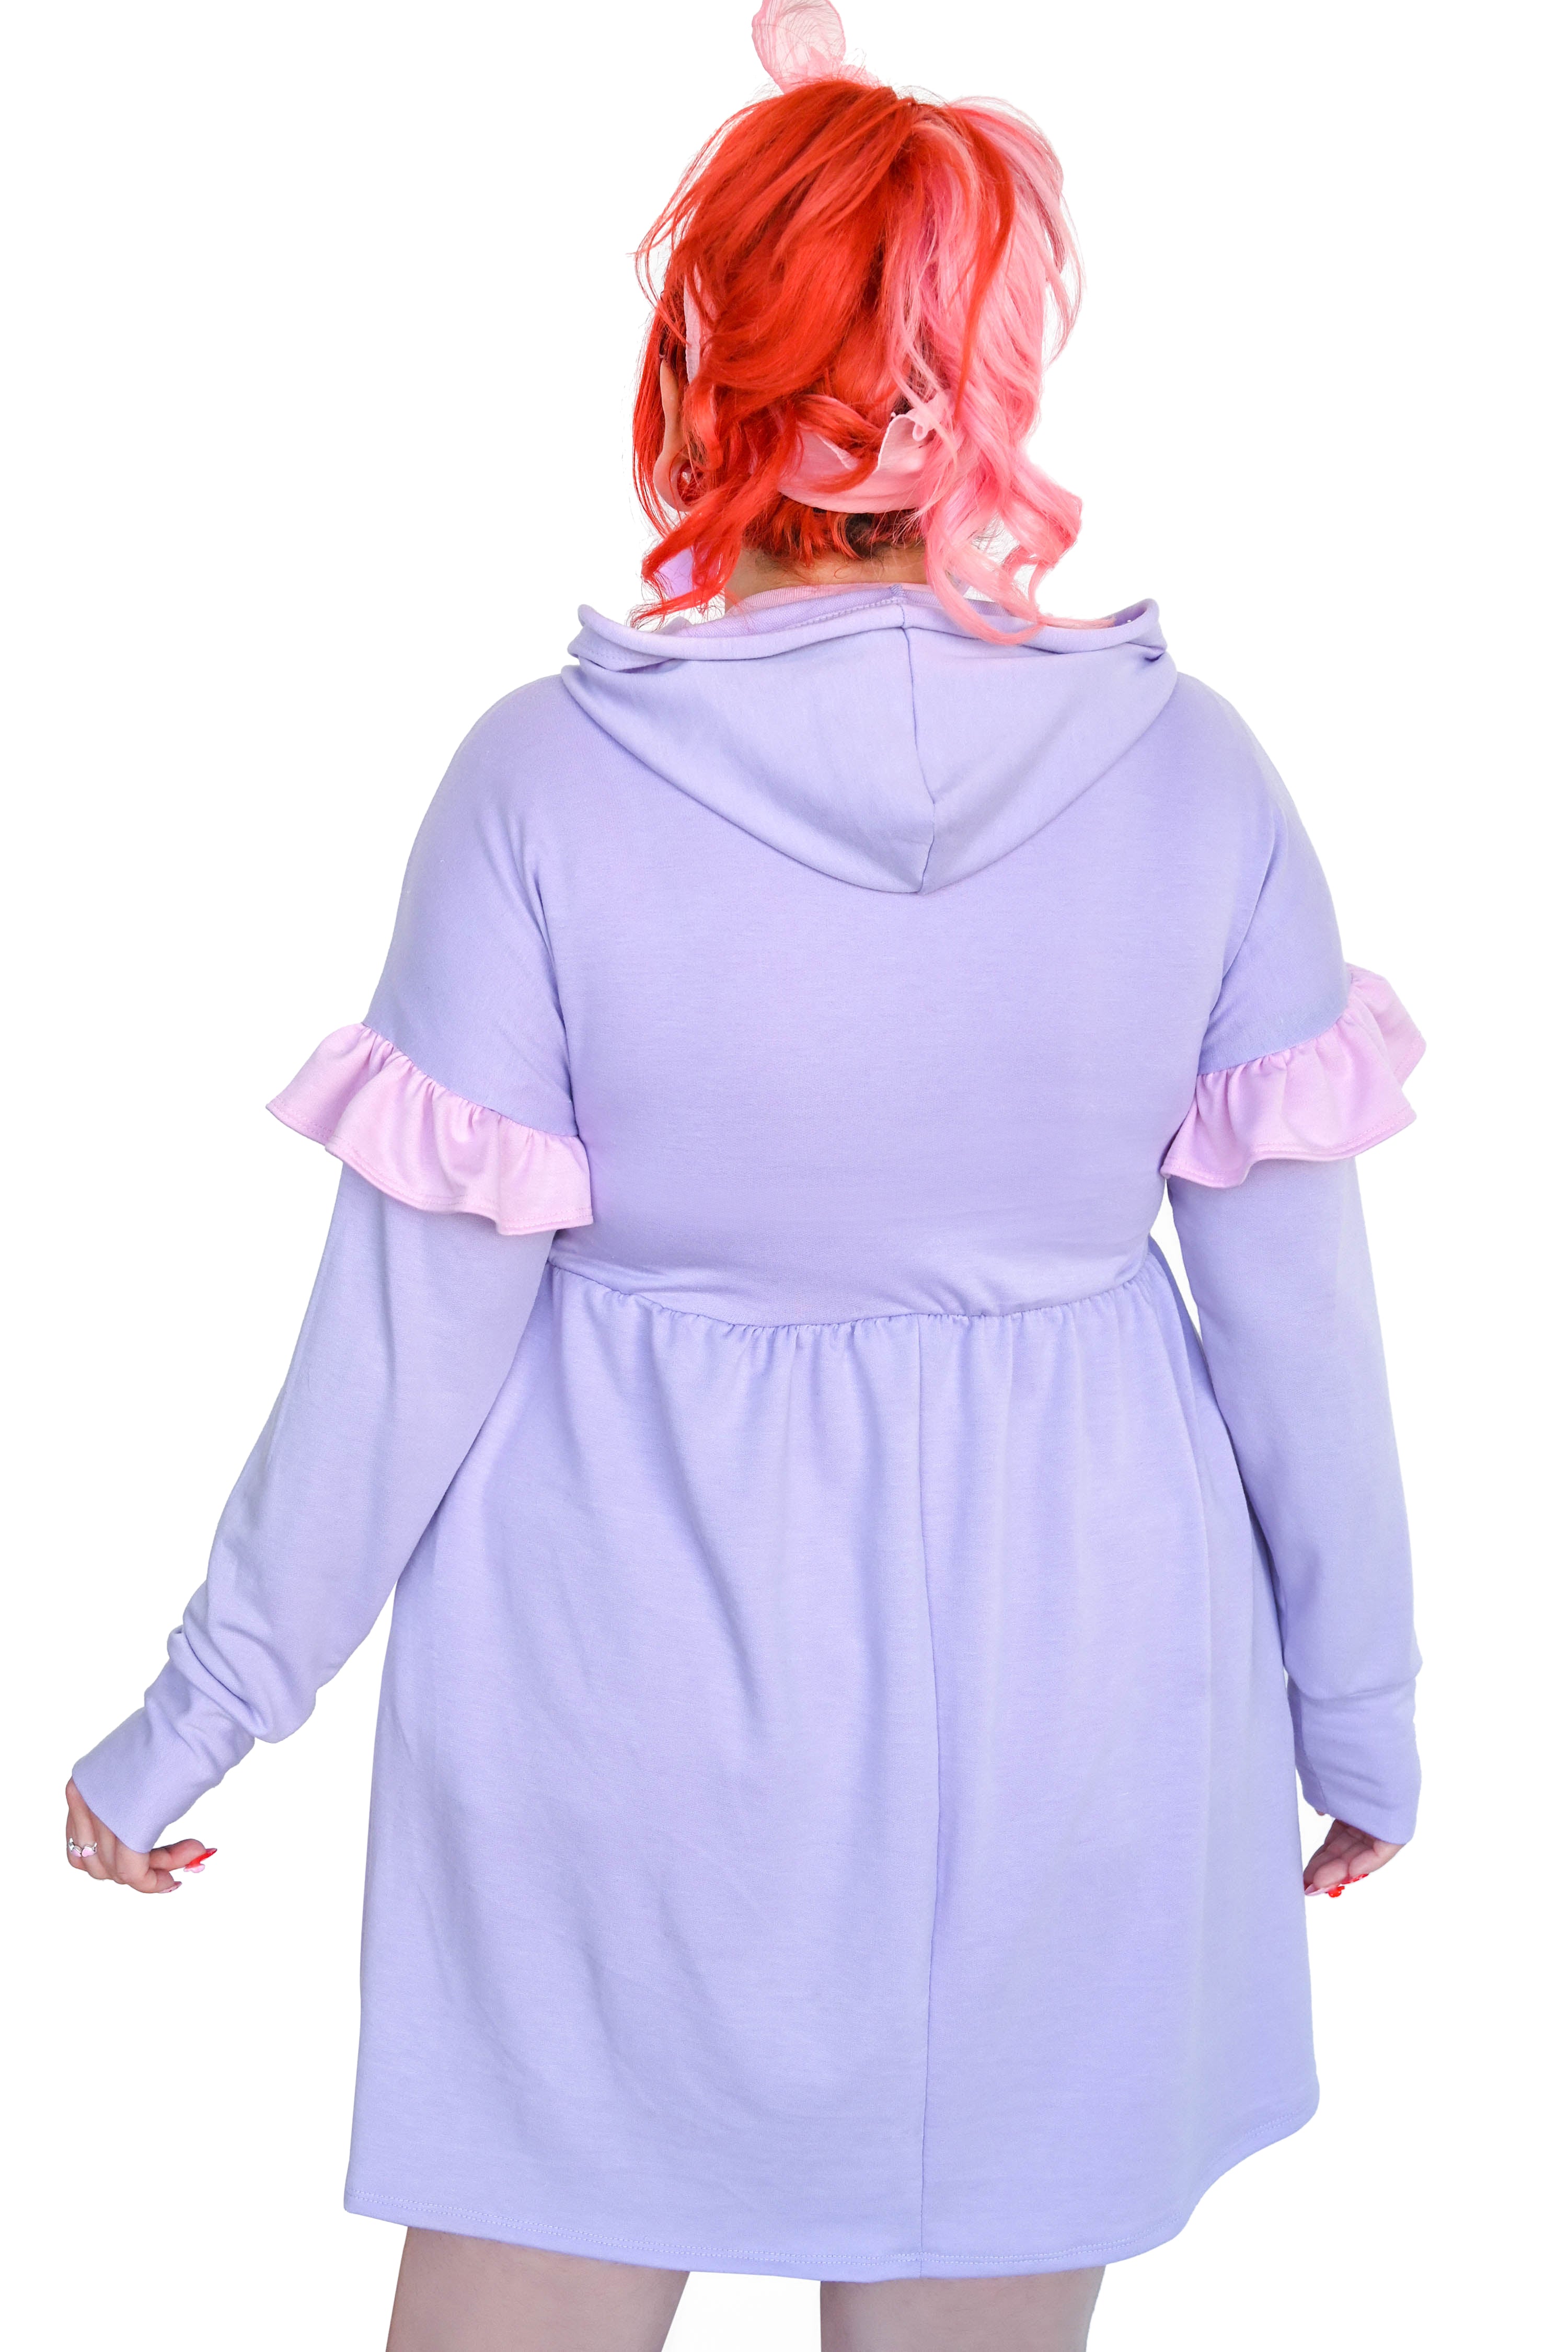 Sweetheart Hoodie Dress with Pockets - Sizes XS & Small left!